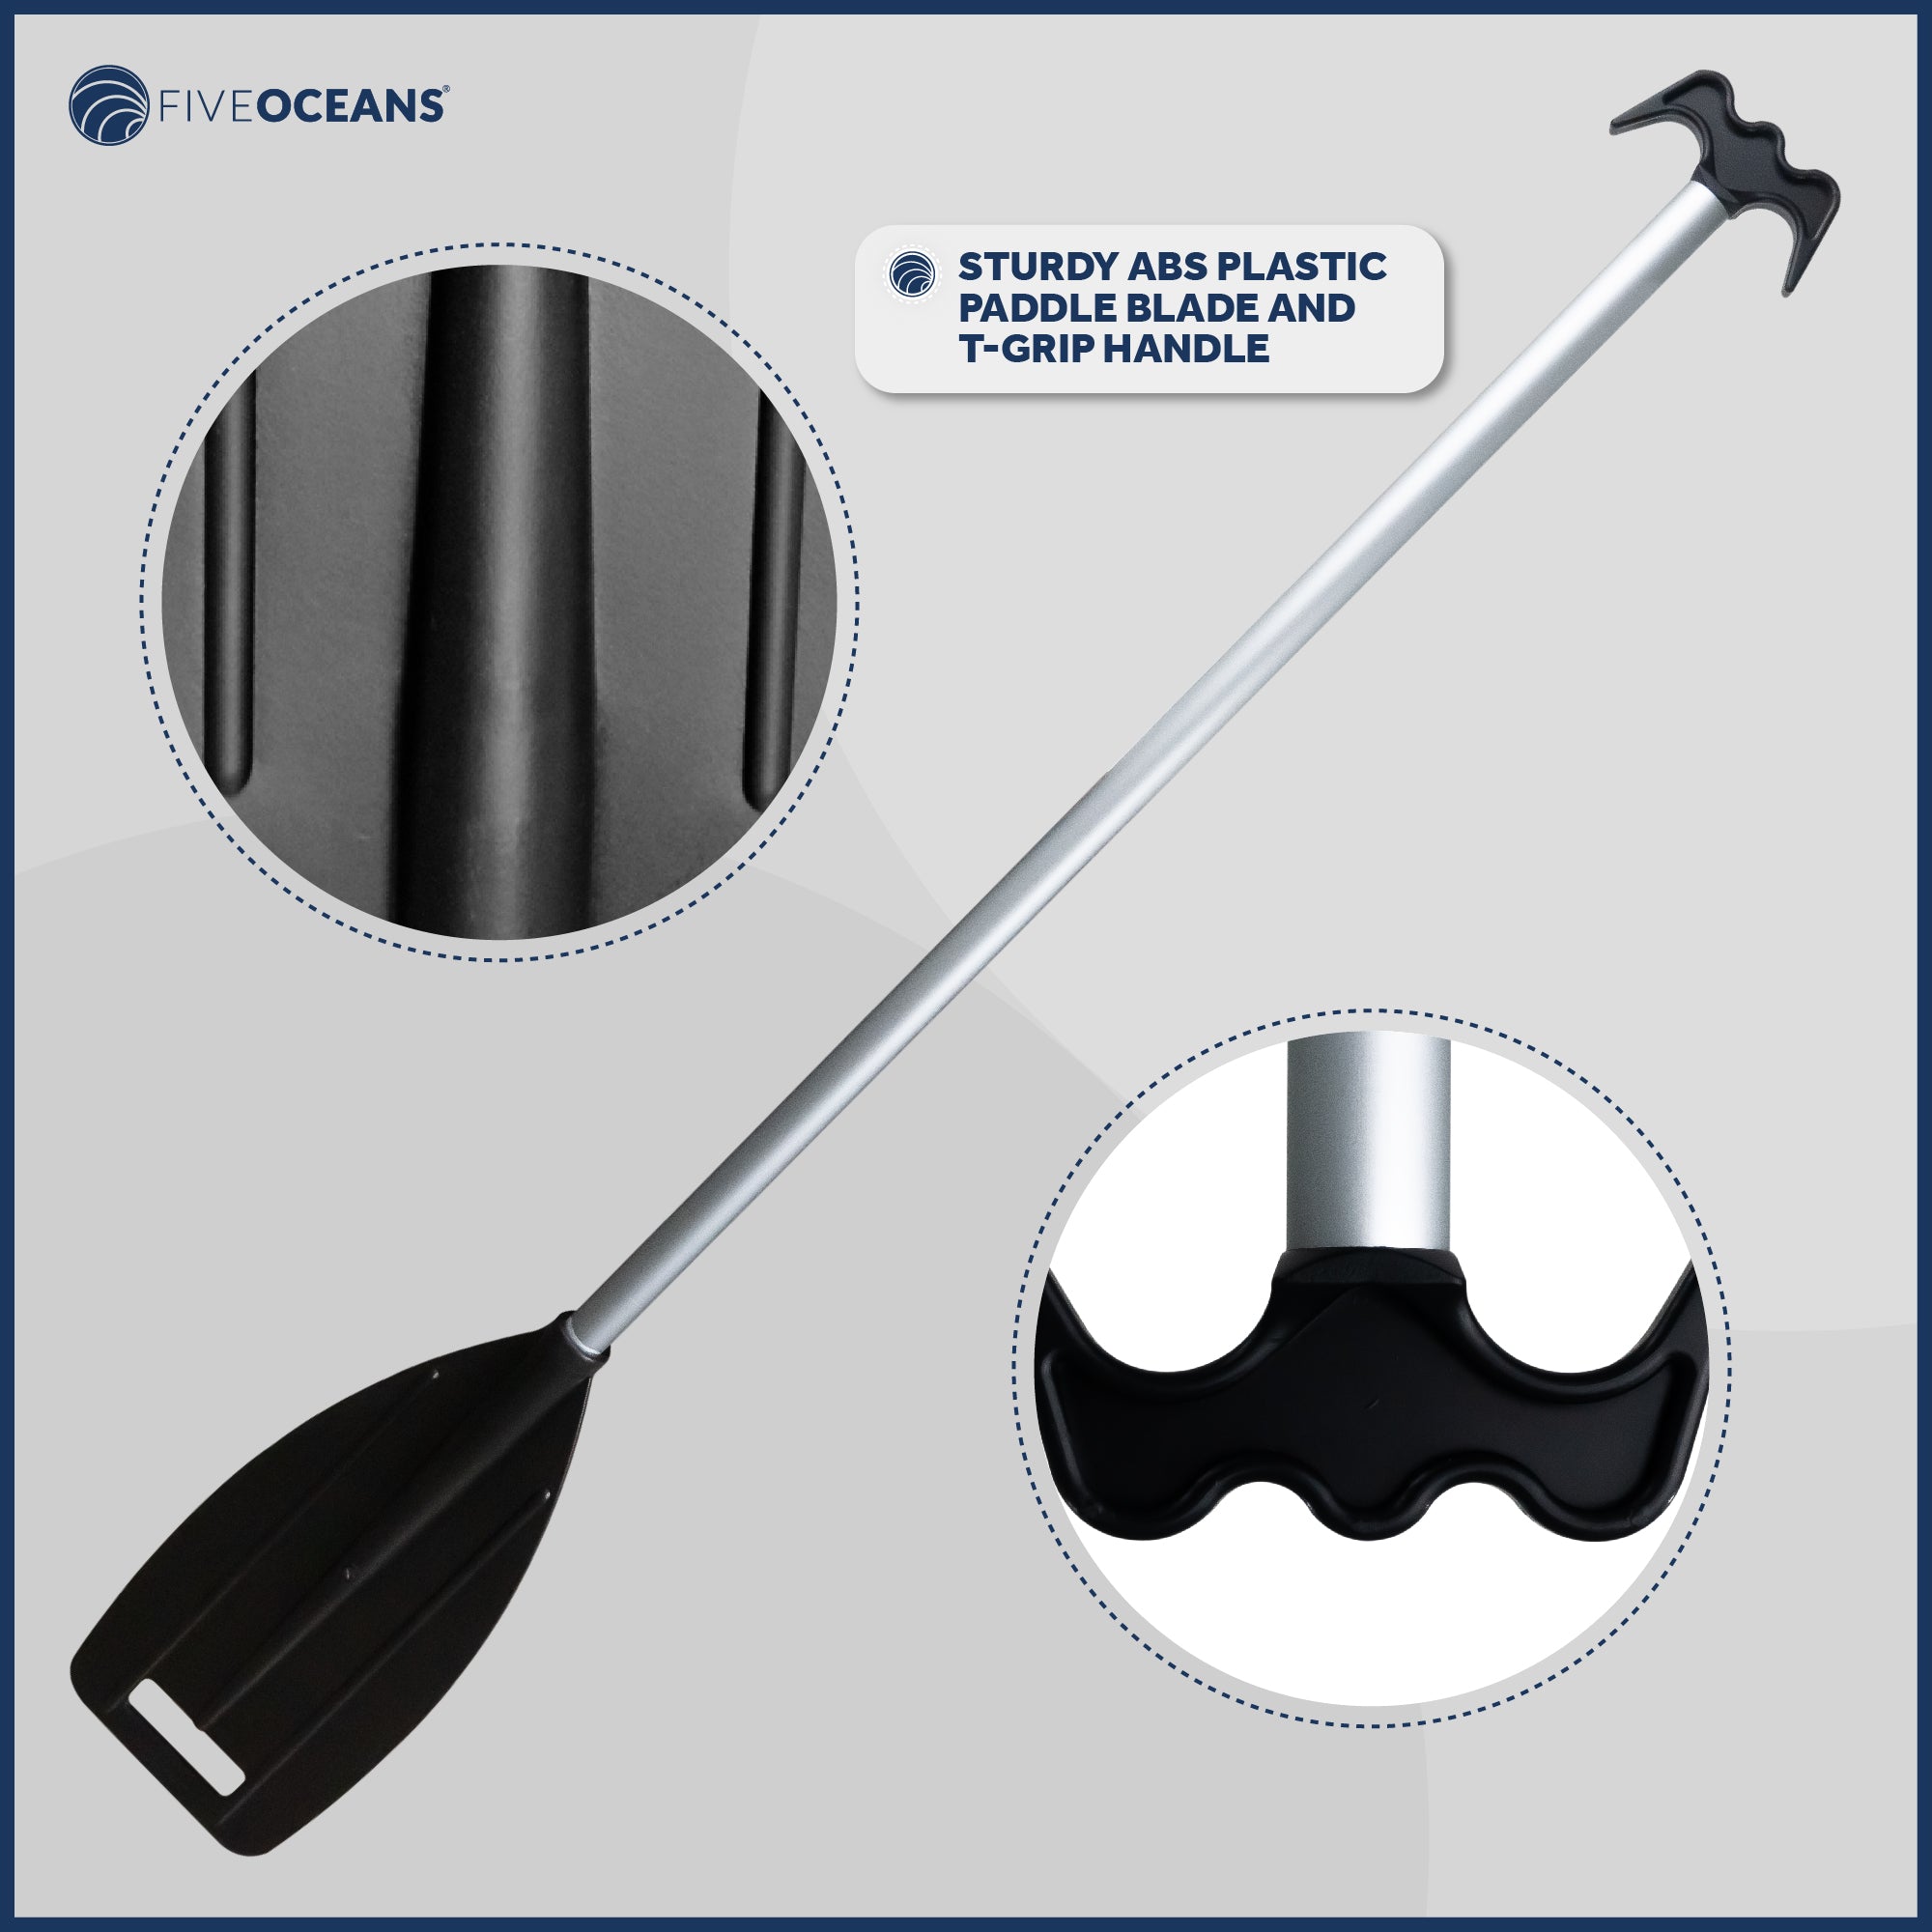 Five Oceans Paddle and Boat Hook, Black 48 FO-1876